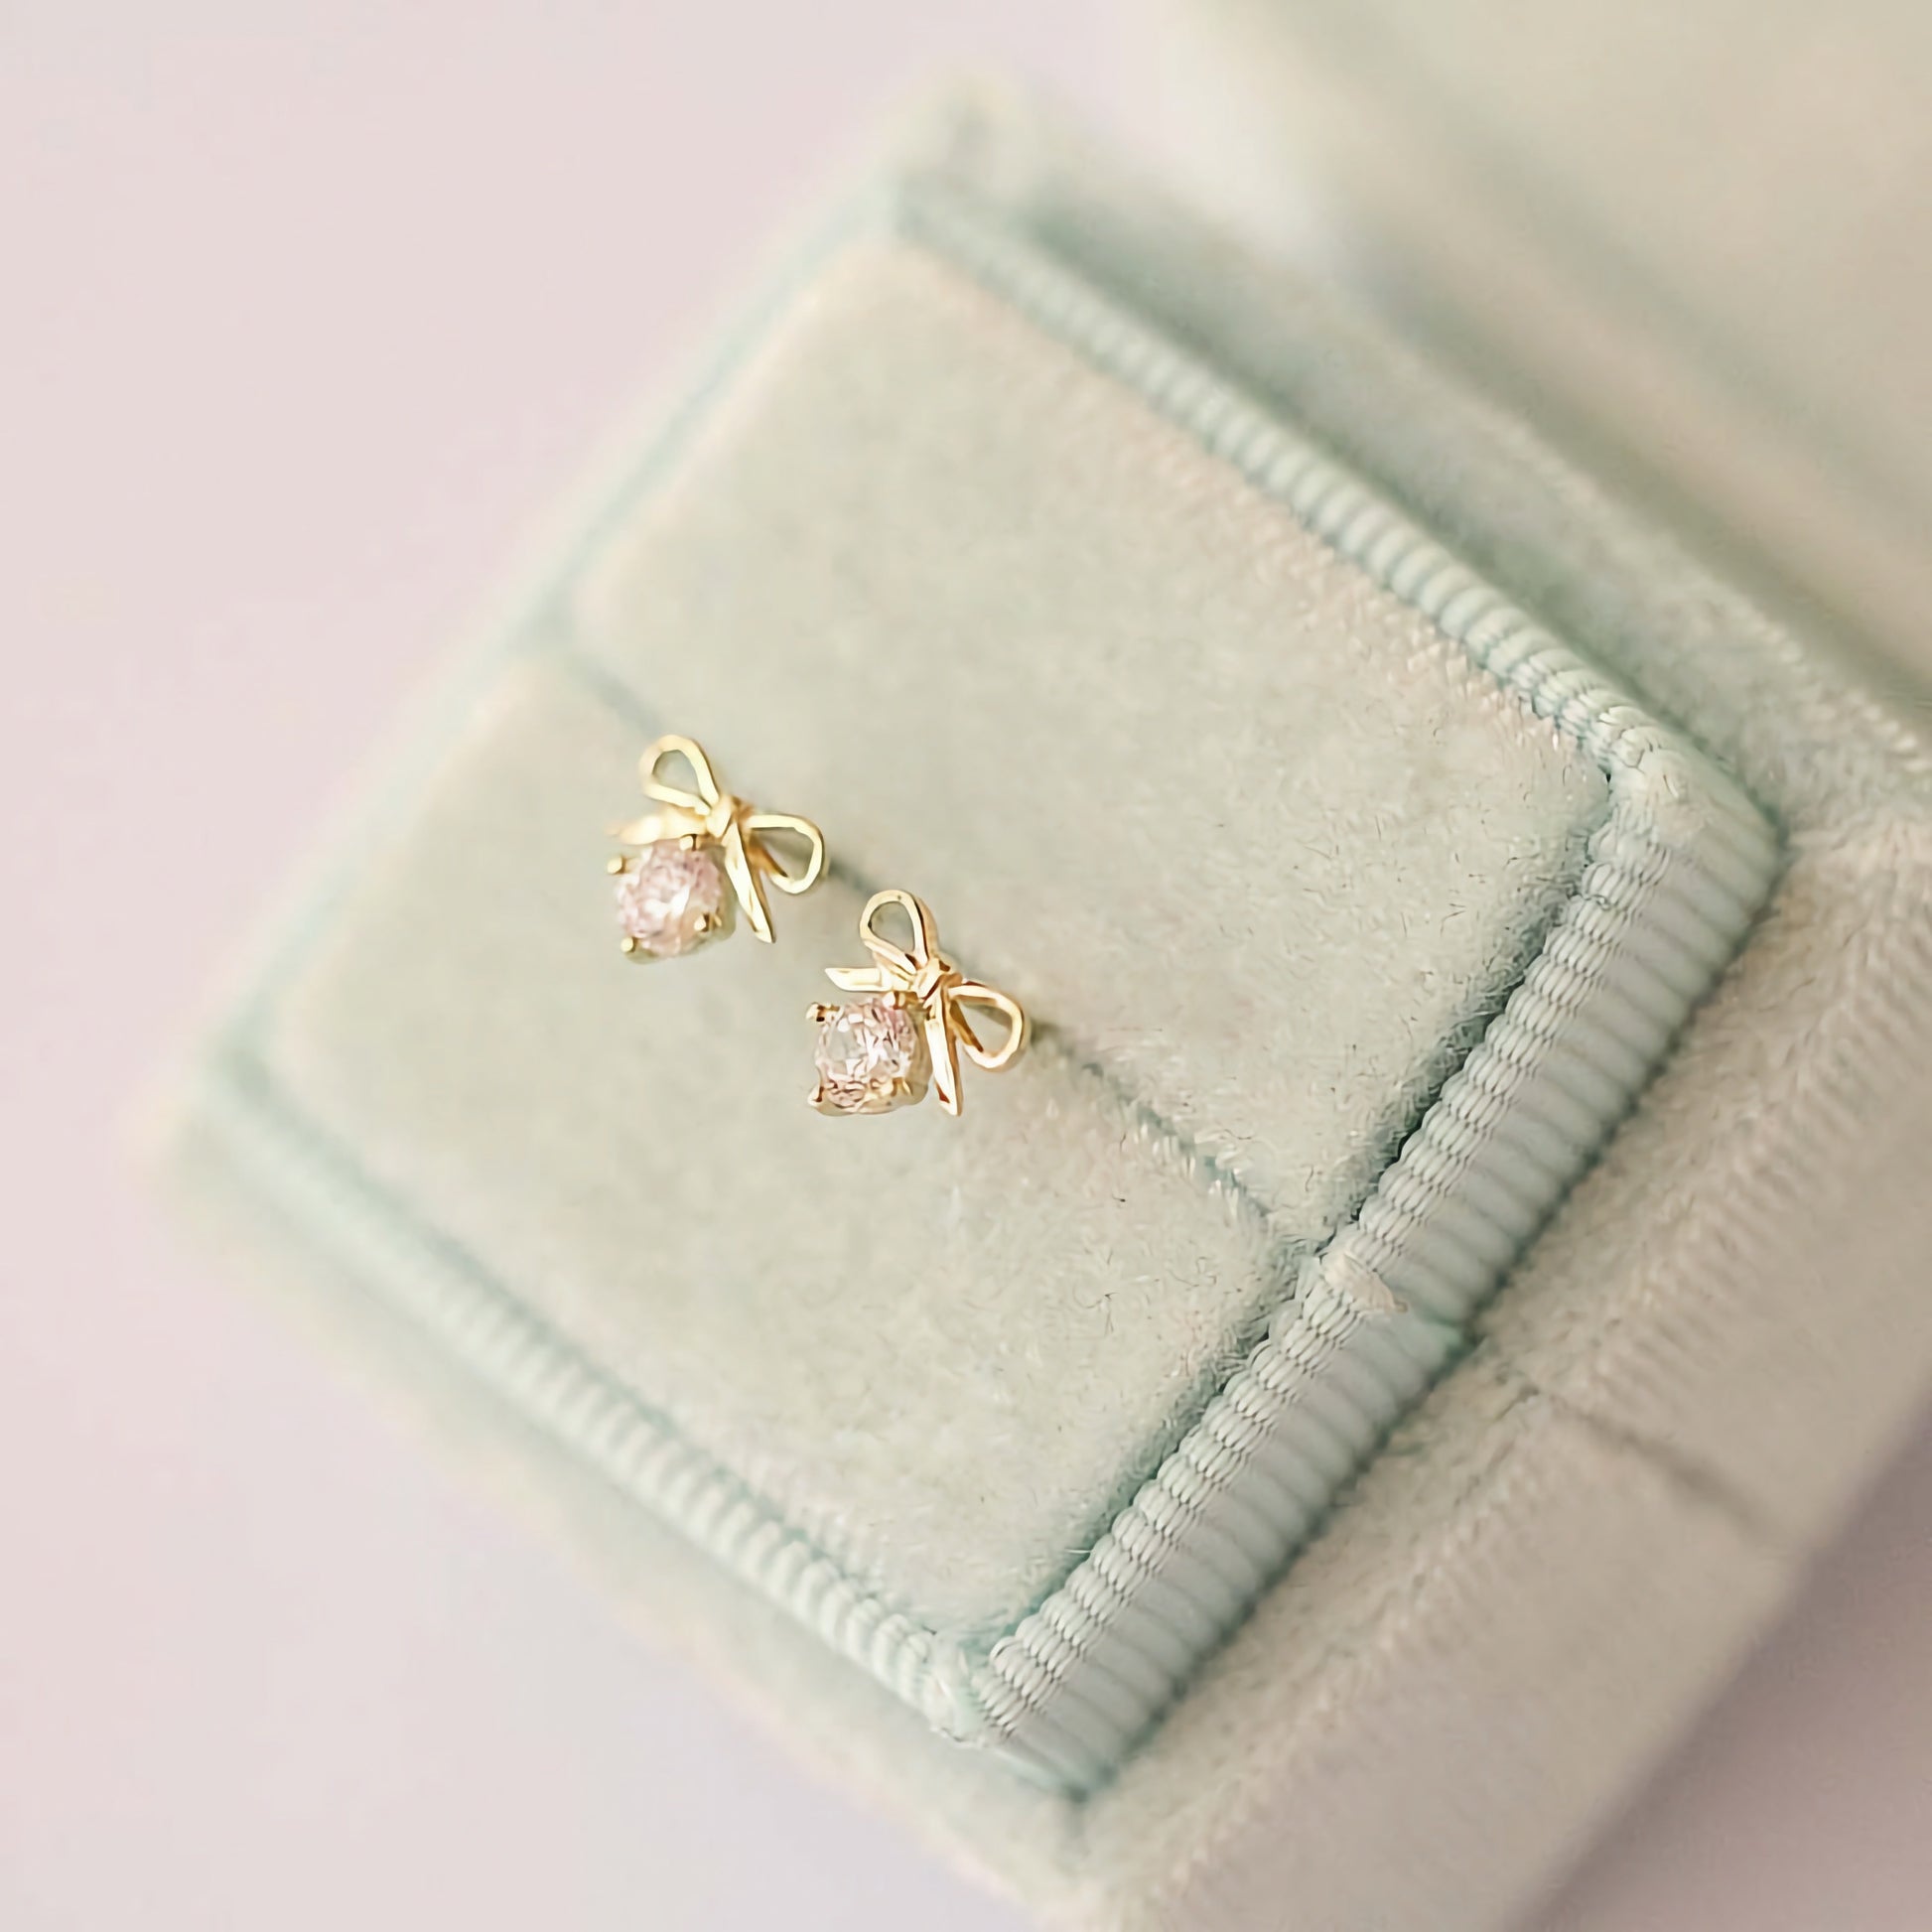 Adorn yourself with 9ct Solid Gold Bowtie Hearts Earrings - A symbol of love and elegance, perfect for expressing your affectionate side.